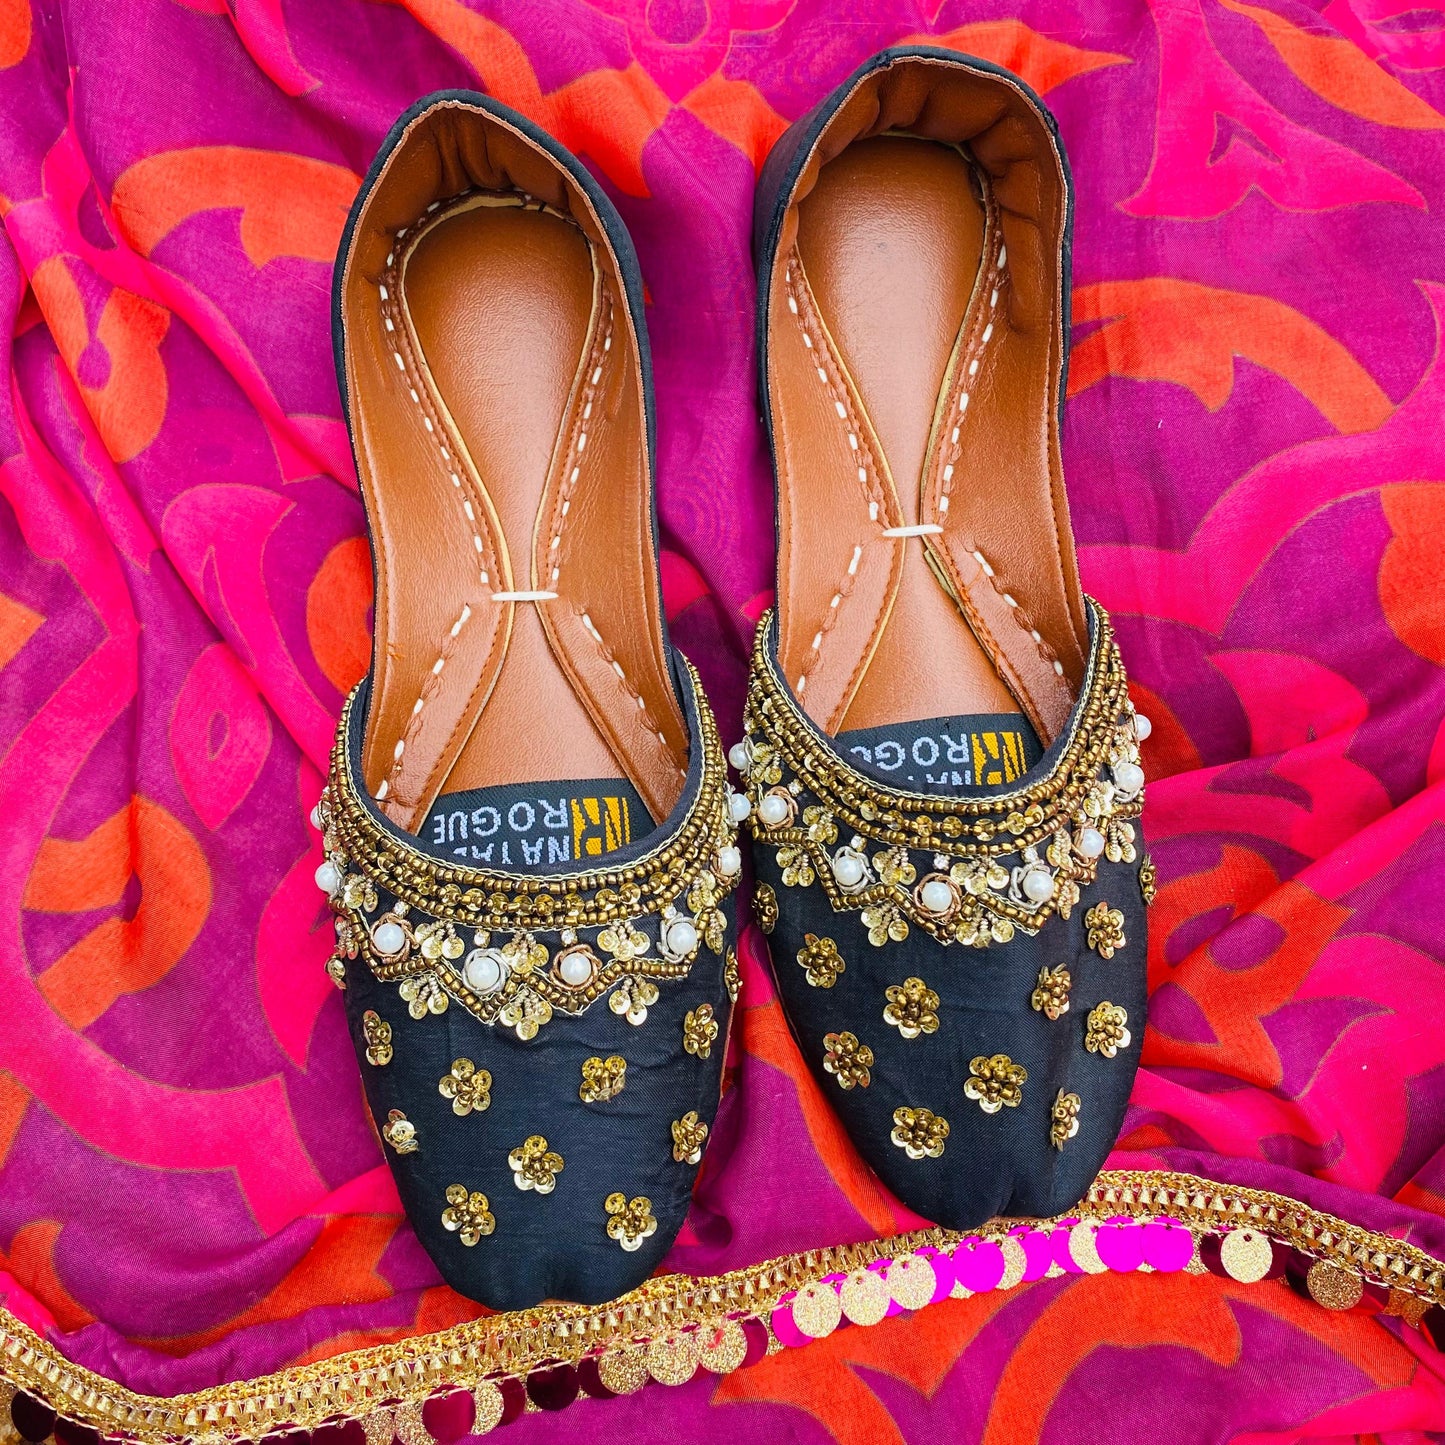 Nawabi Khussa in Luxurious Leather